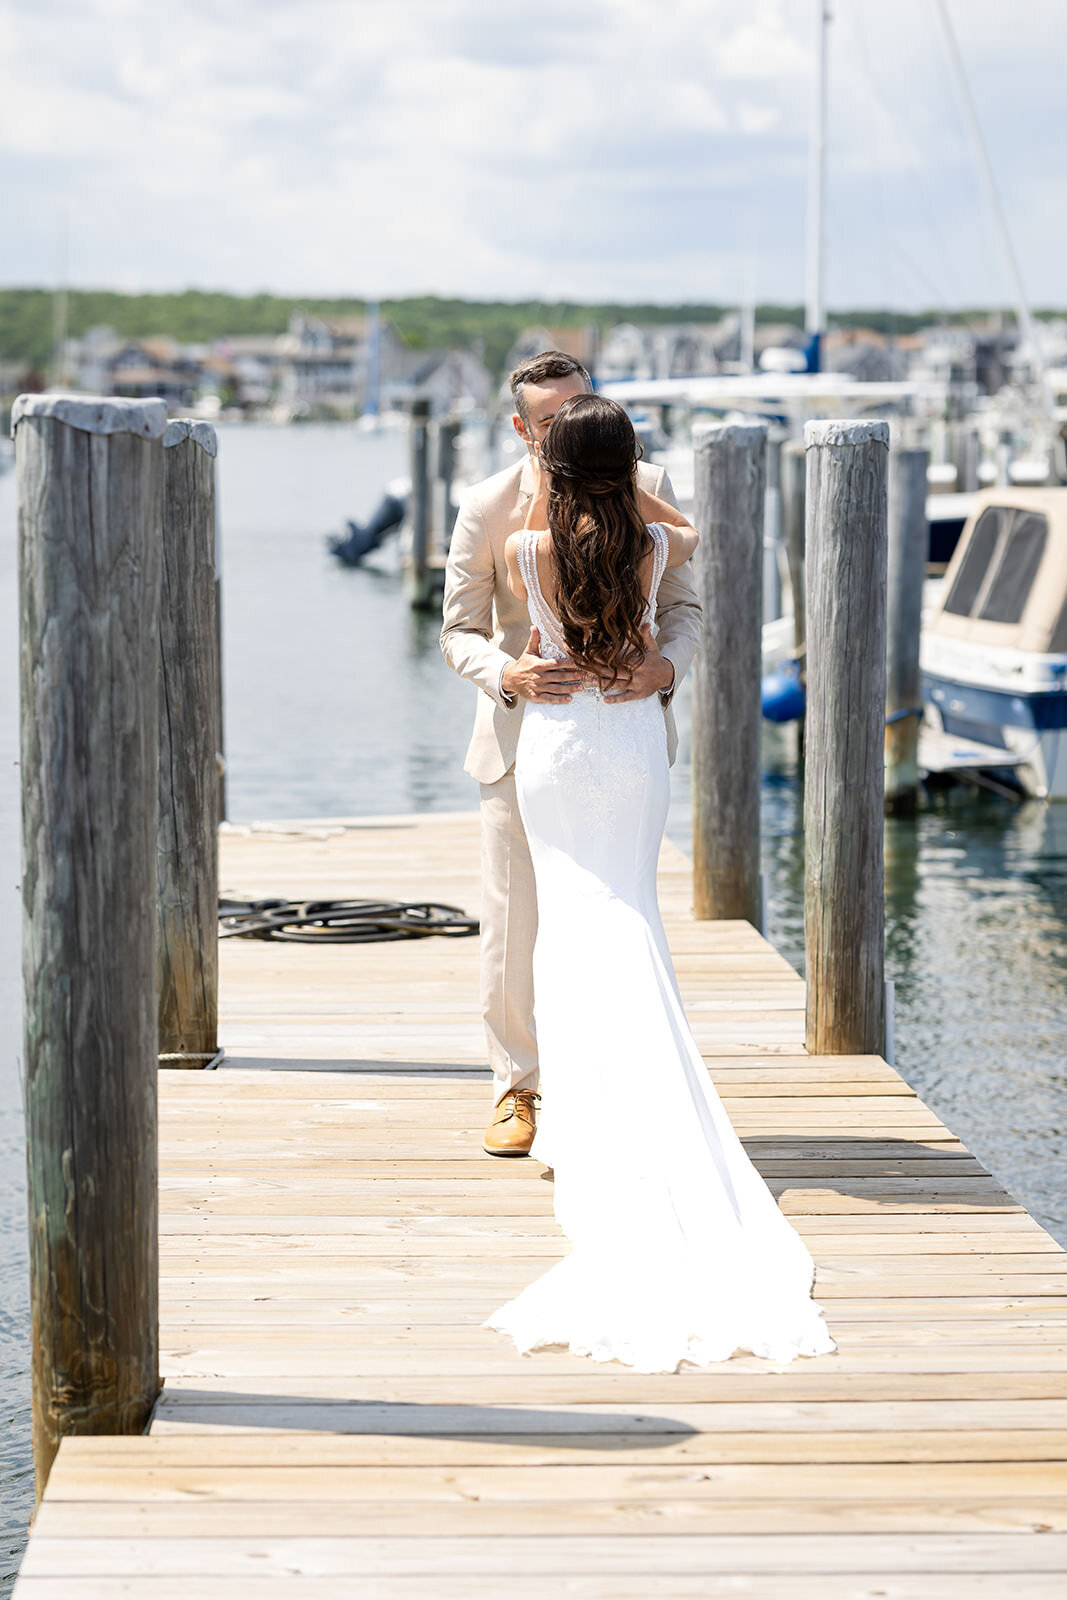 A bride and groom kissing on a dock